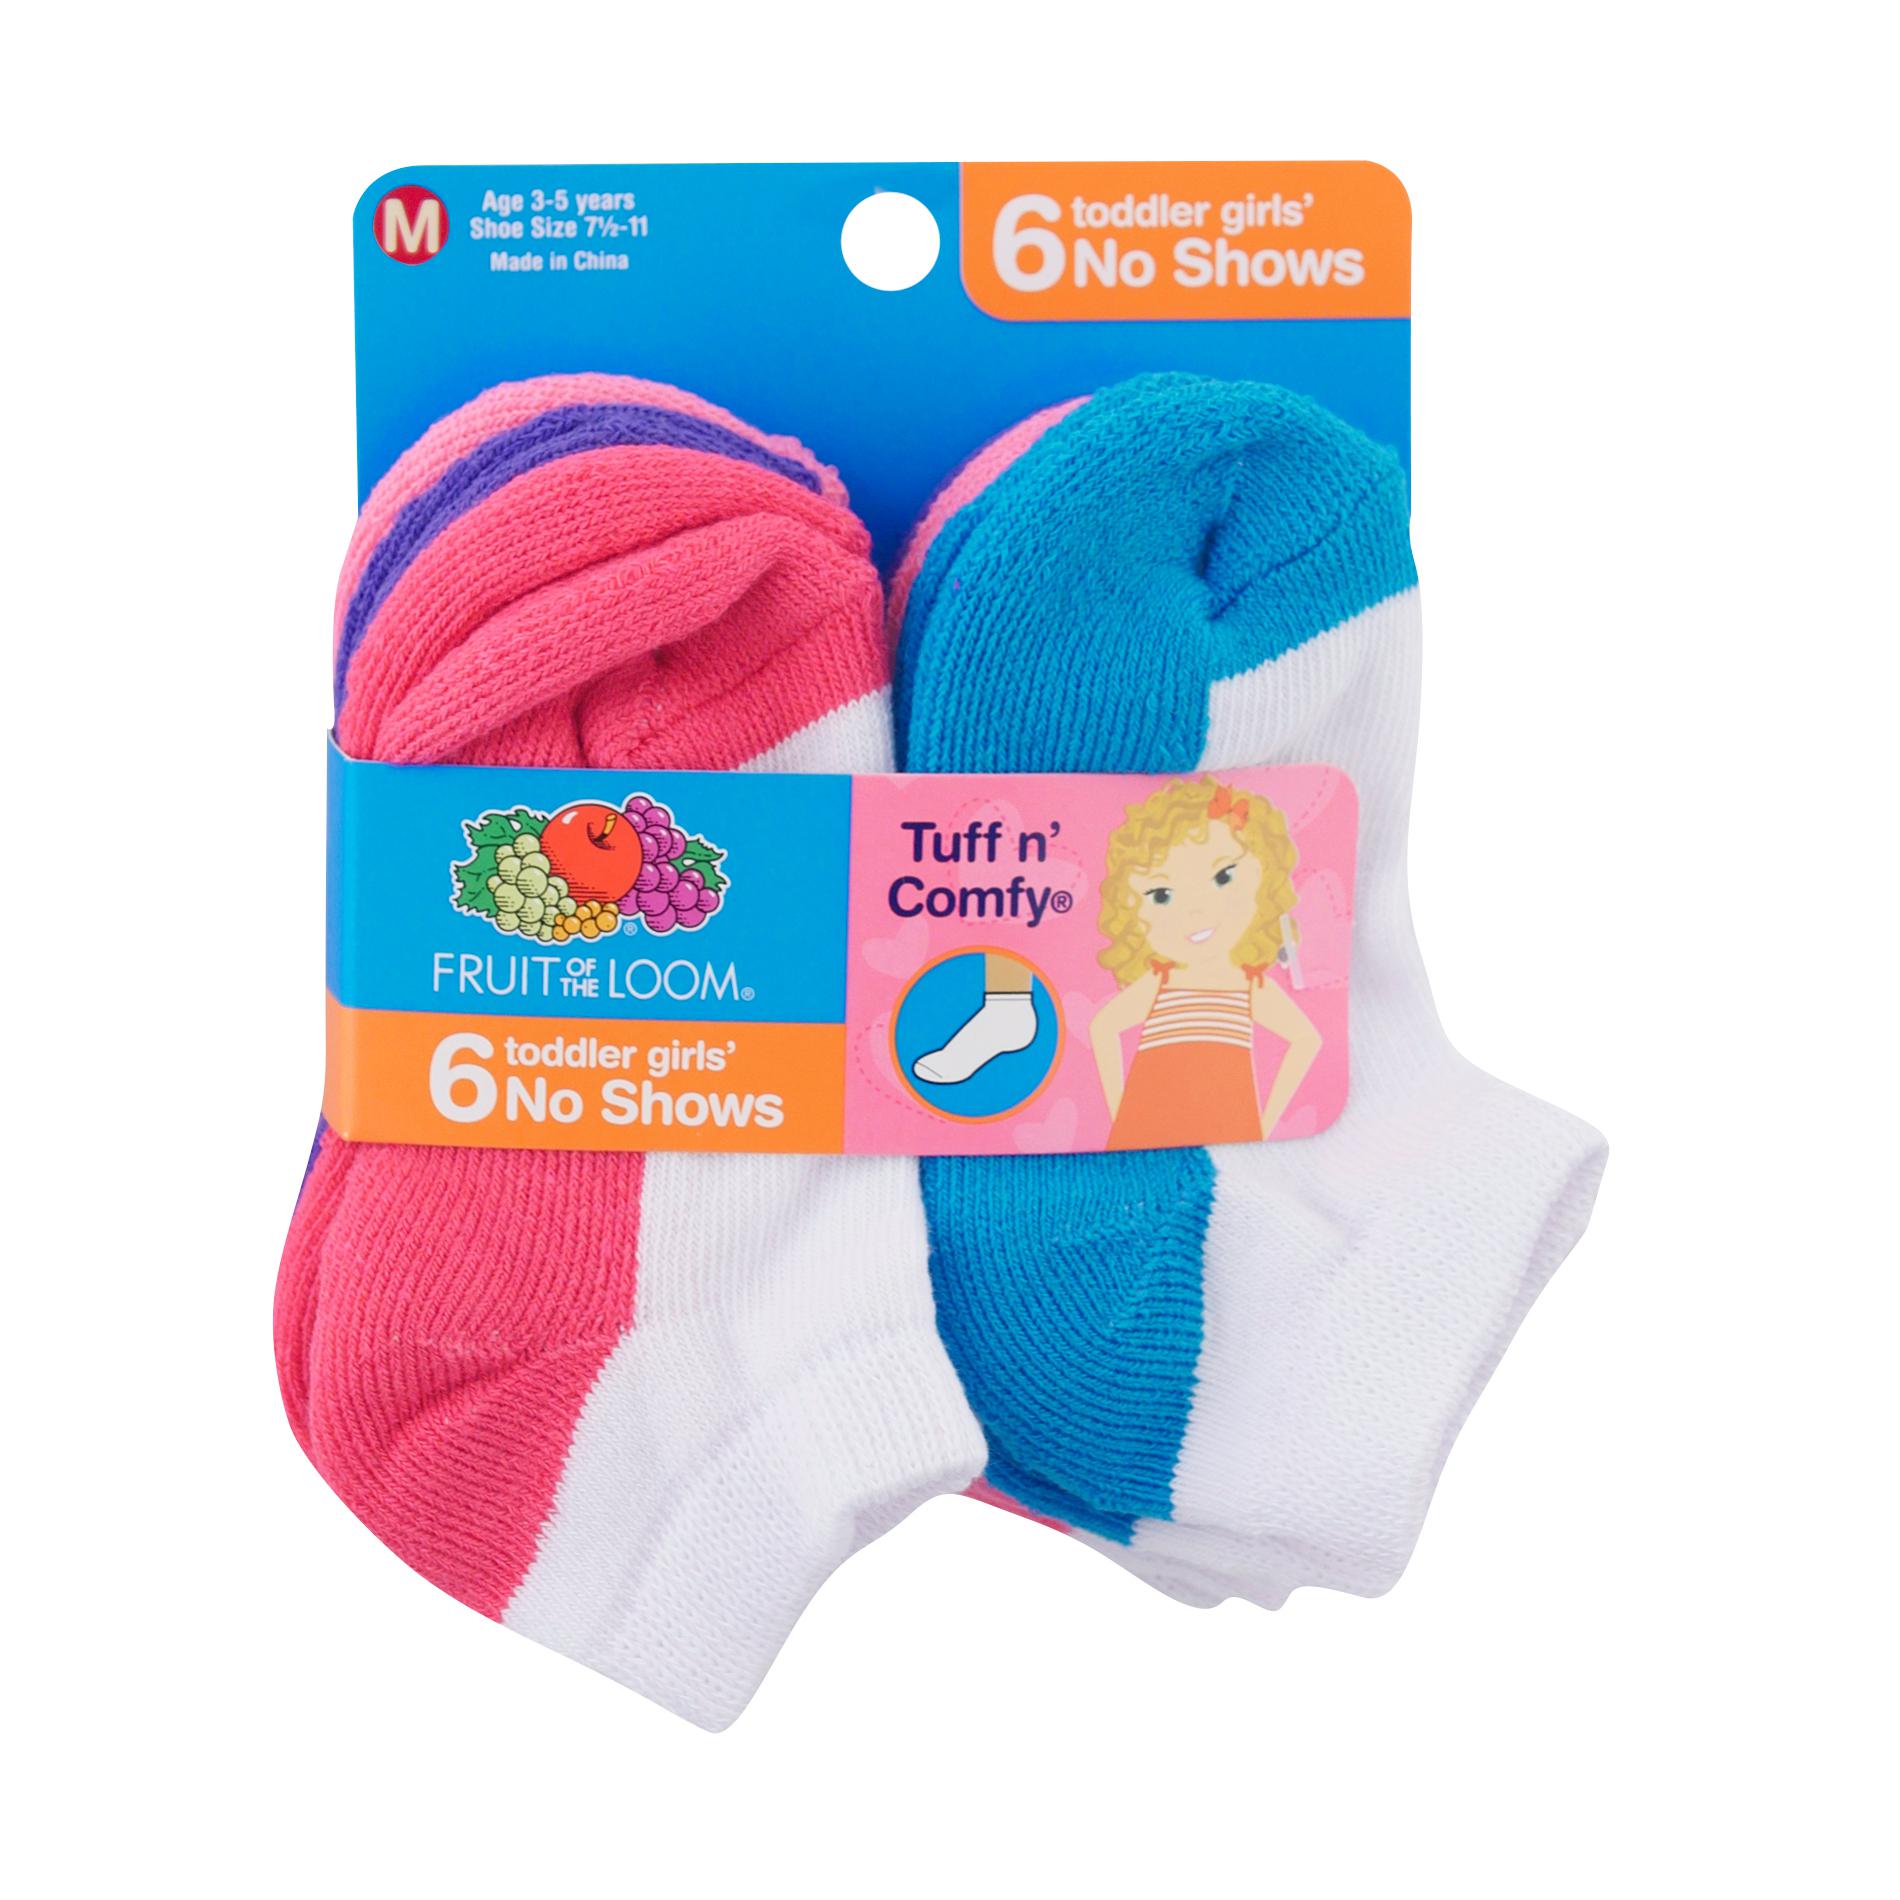 Fruit of the Loom Toddler Girls' 6-Pairs Tuff n' Comfy No-Show Socks